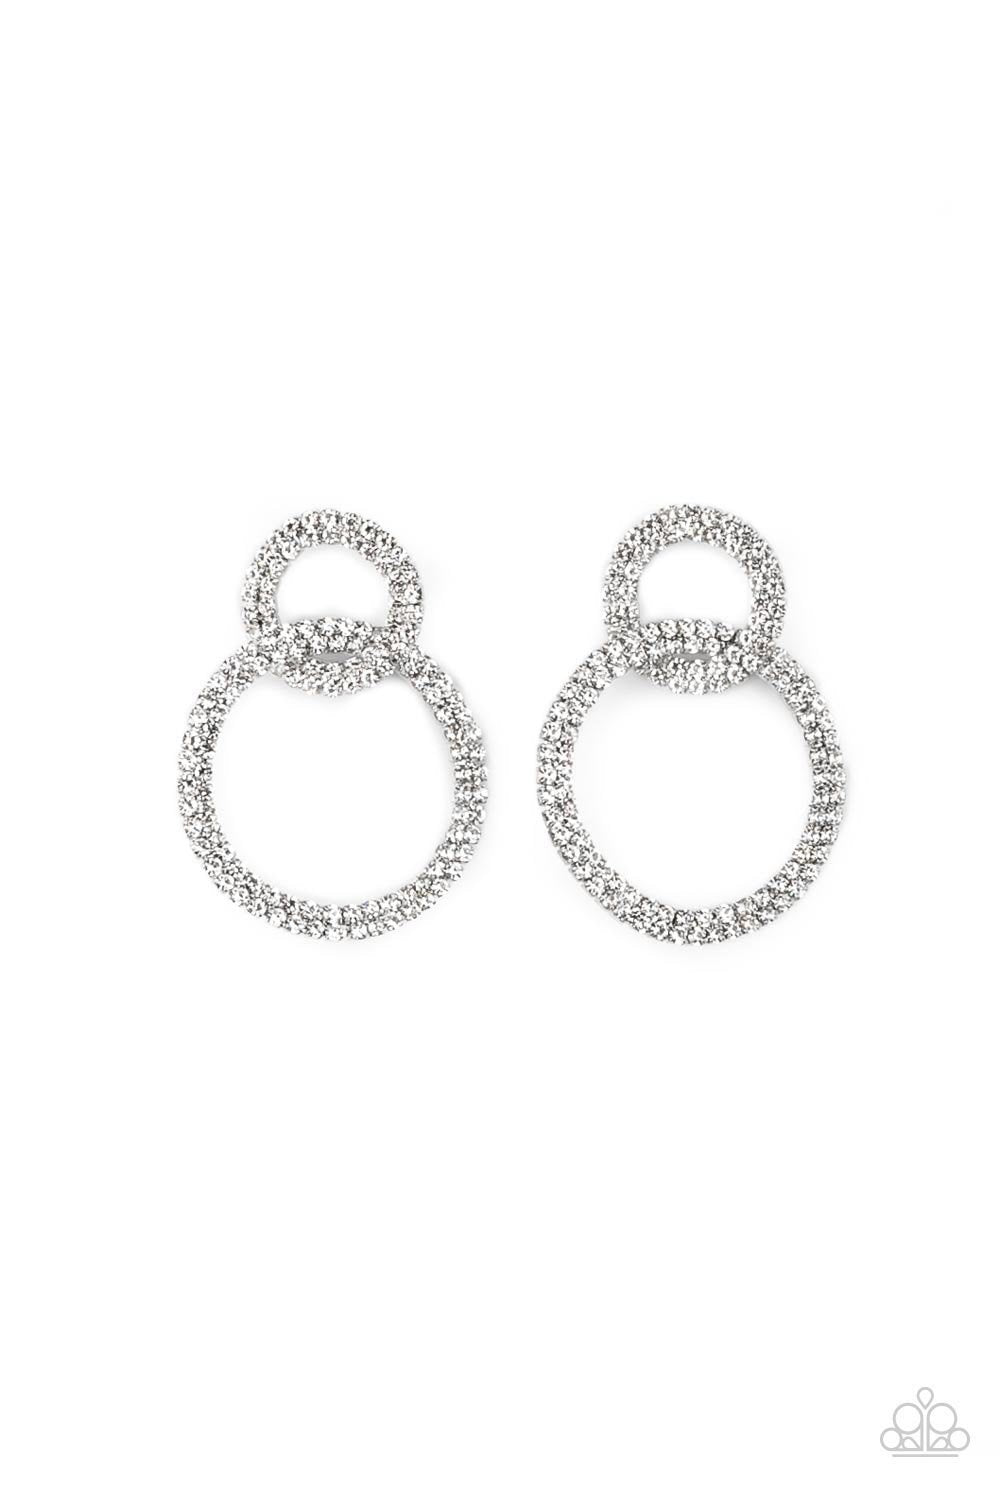 Intensely Icy Gunmetal Black and White Rhinestone Earrings - Paparazzi Accessories- lightbox - CarasShop.com - $5 Jewelry by Cara Jewels